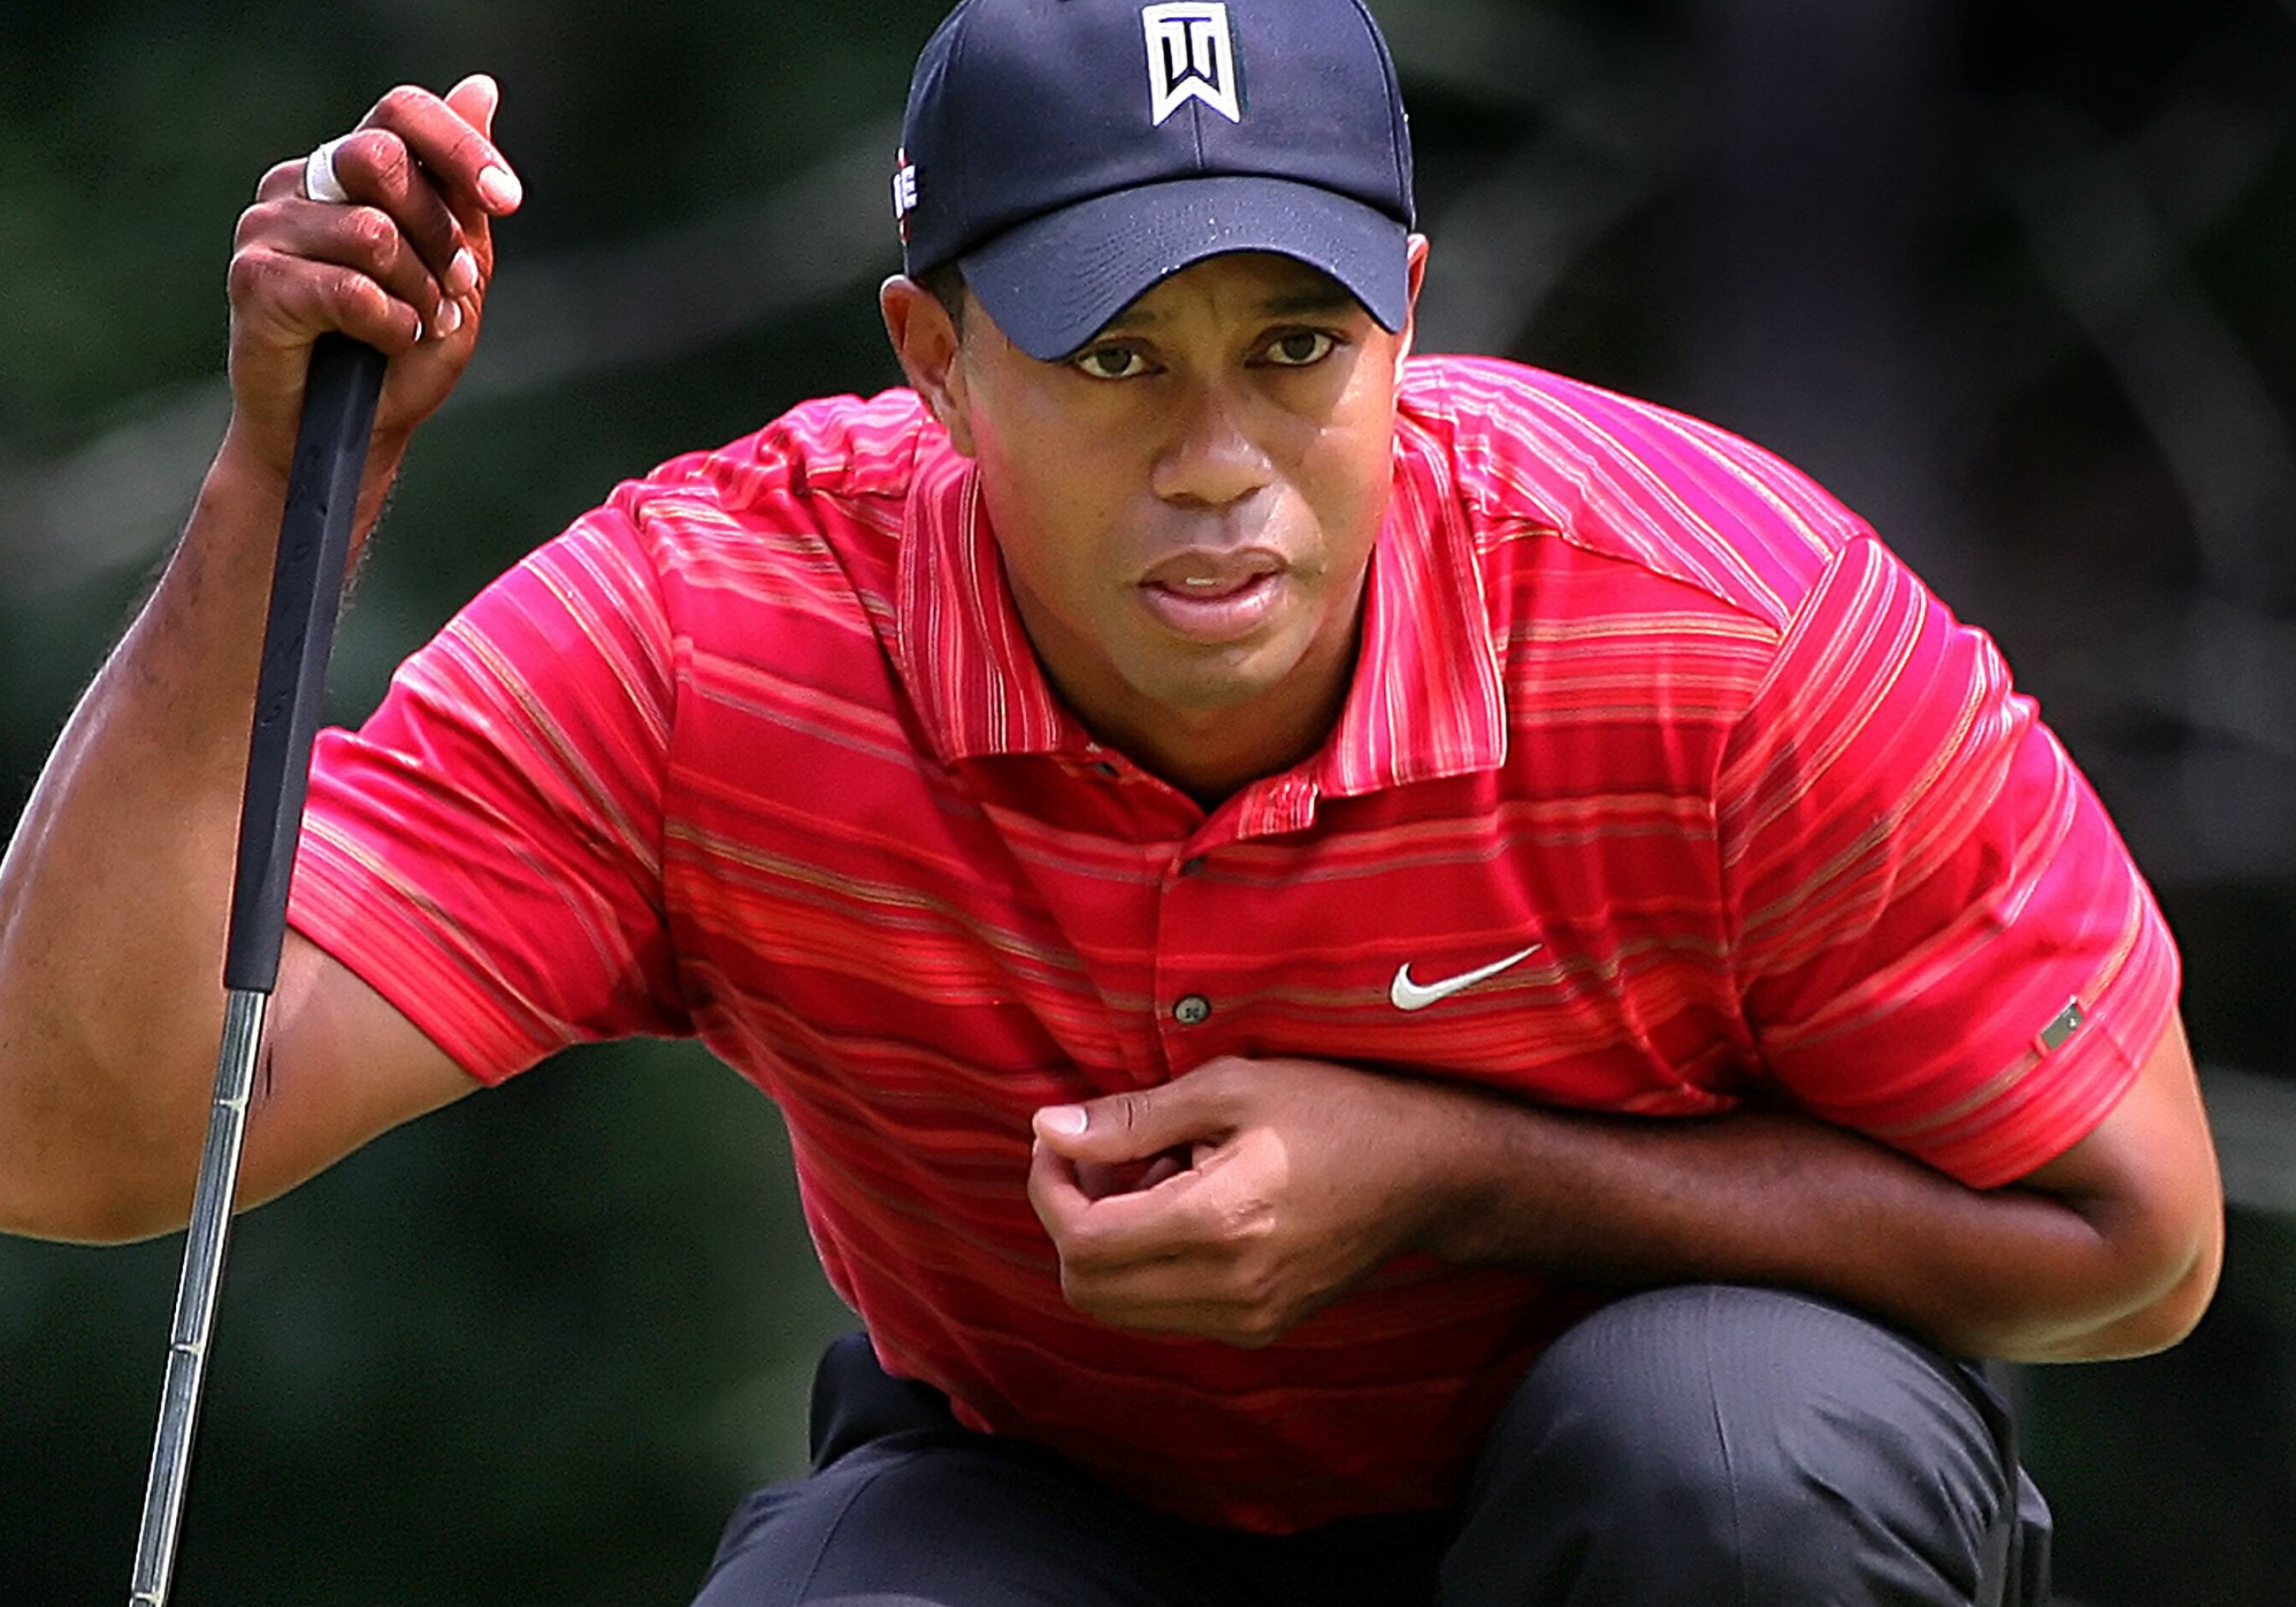 Tiger Woods: Sports, He is tied for first in PGA Tour wins, ranks second in men's major championships. 3010x2100 HD Wallpaper.